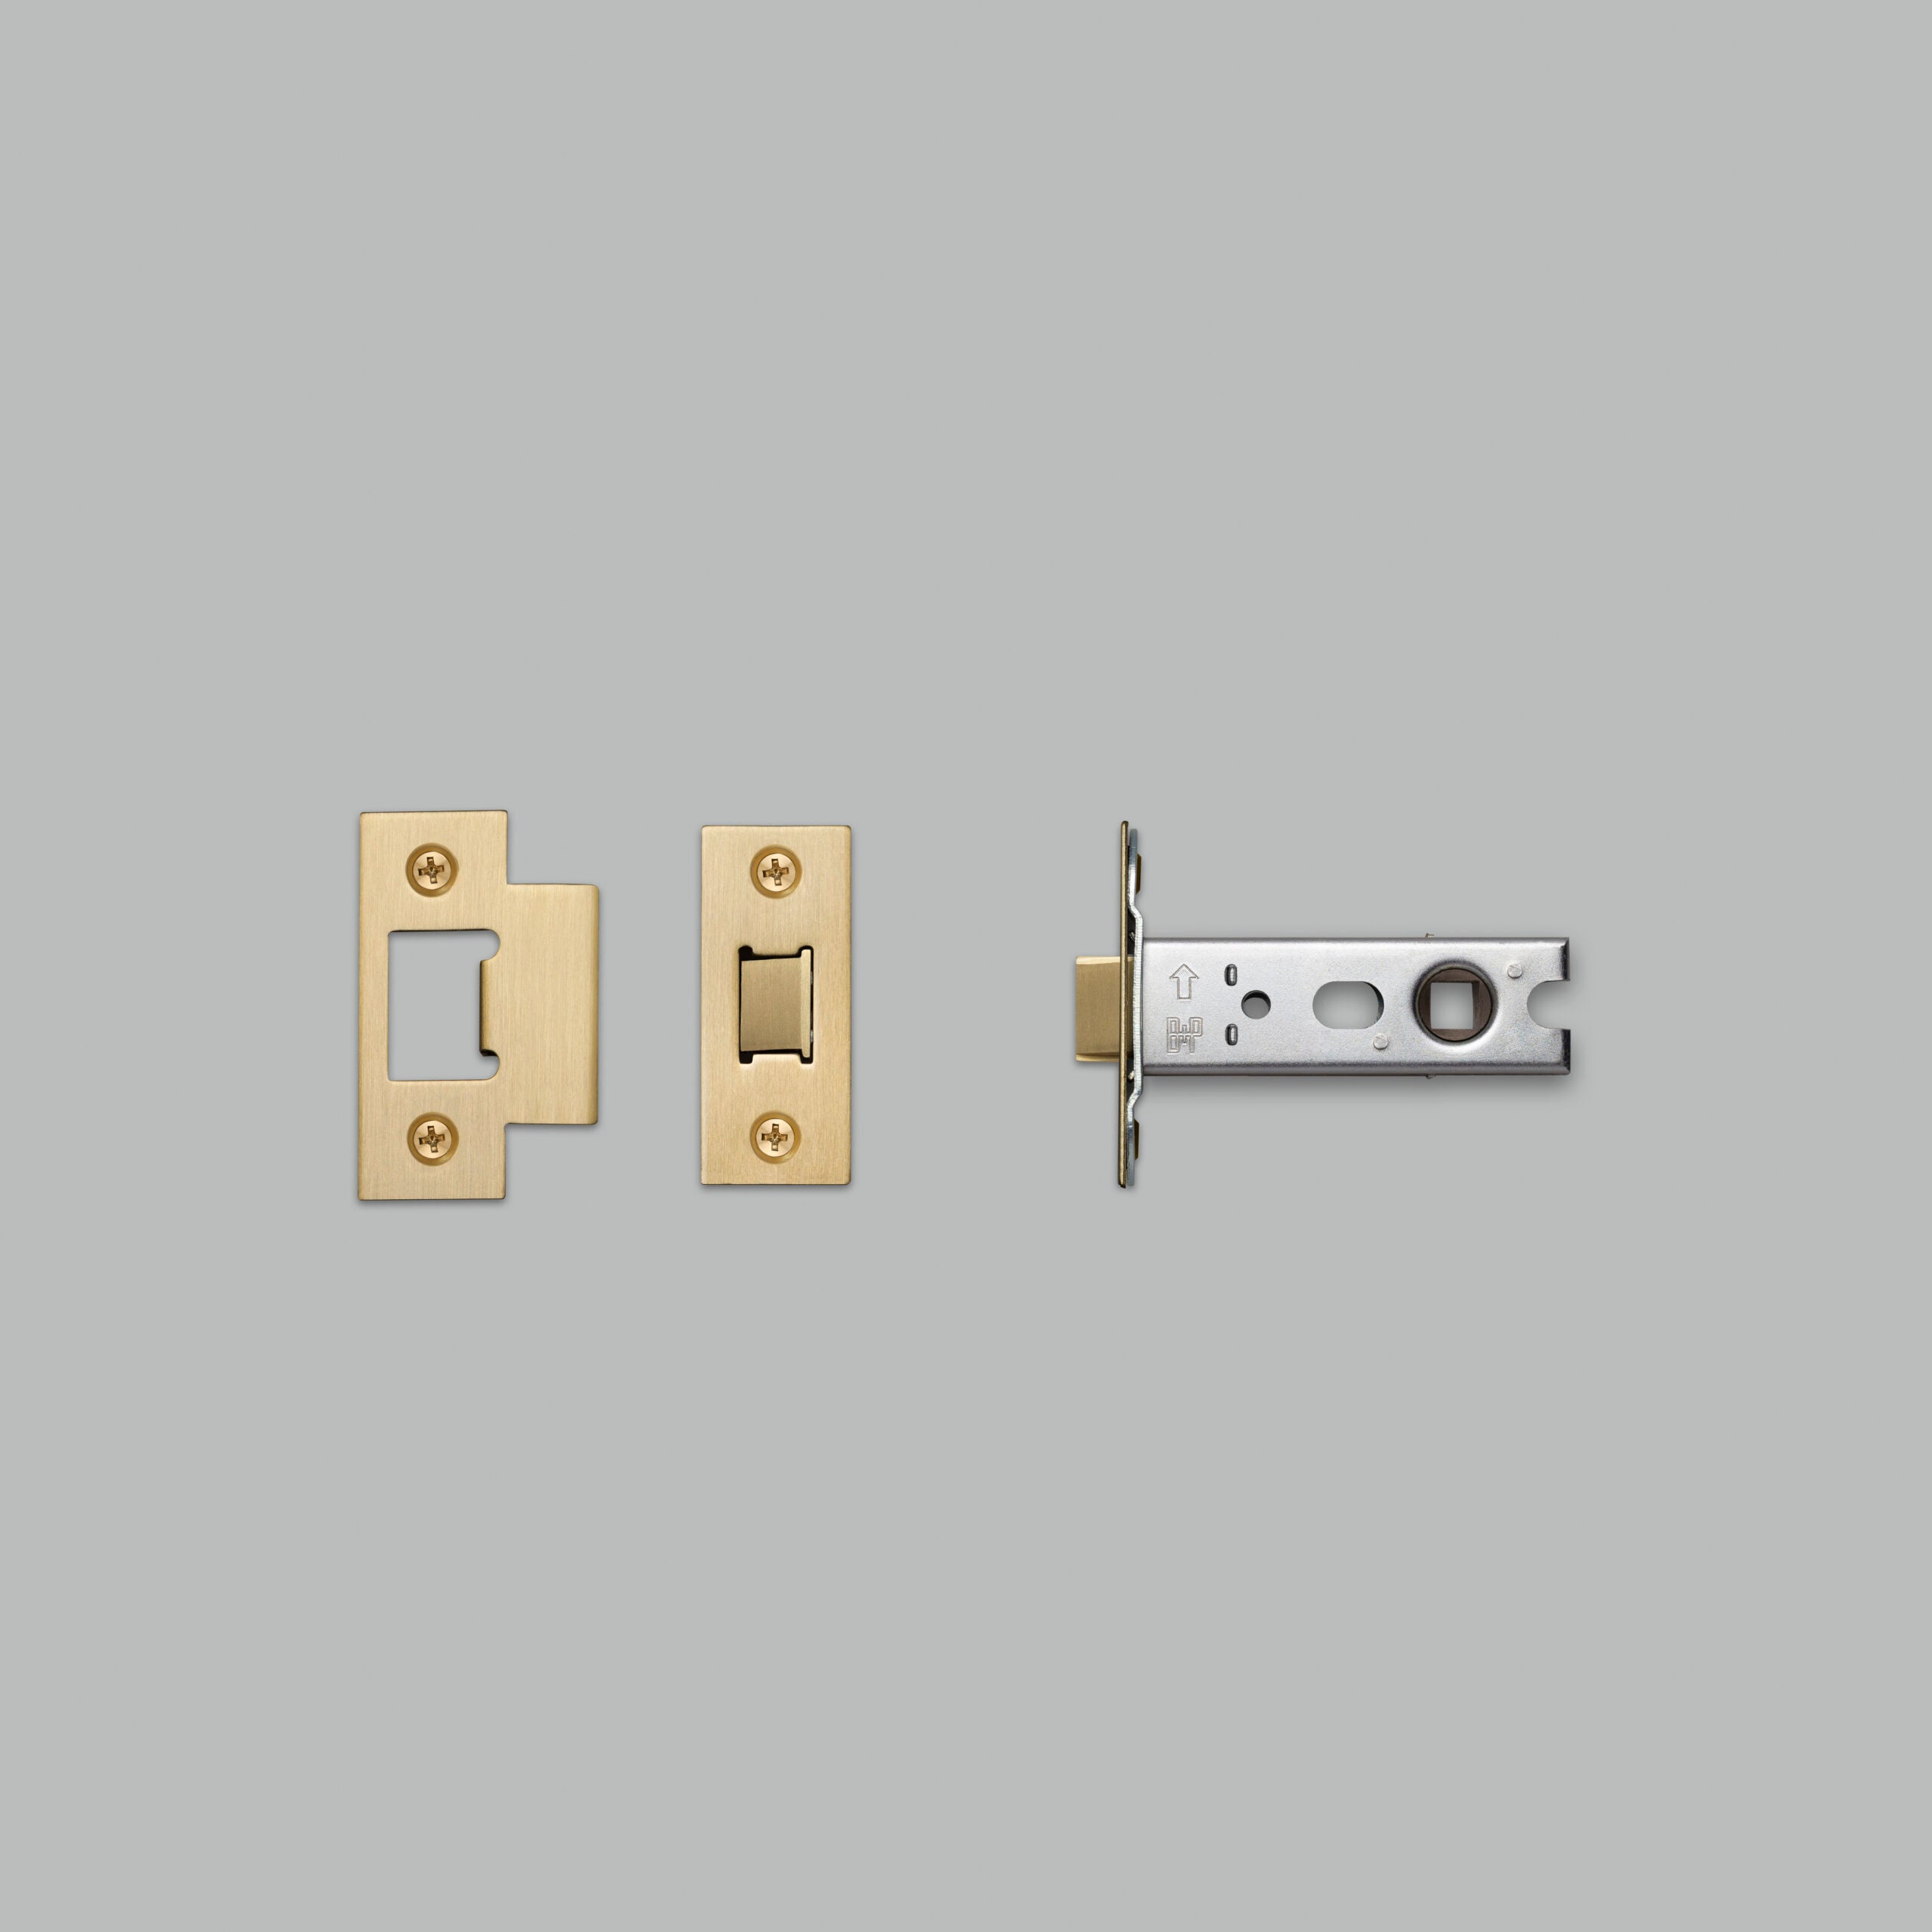 The UK Tubular Latch | door handle |57mm | By Buster + Punch